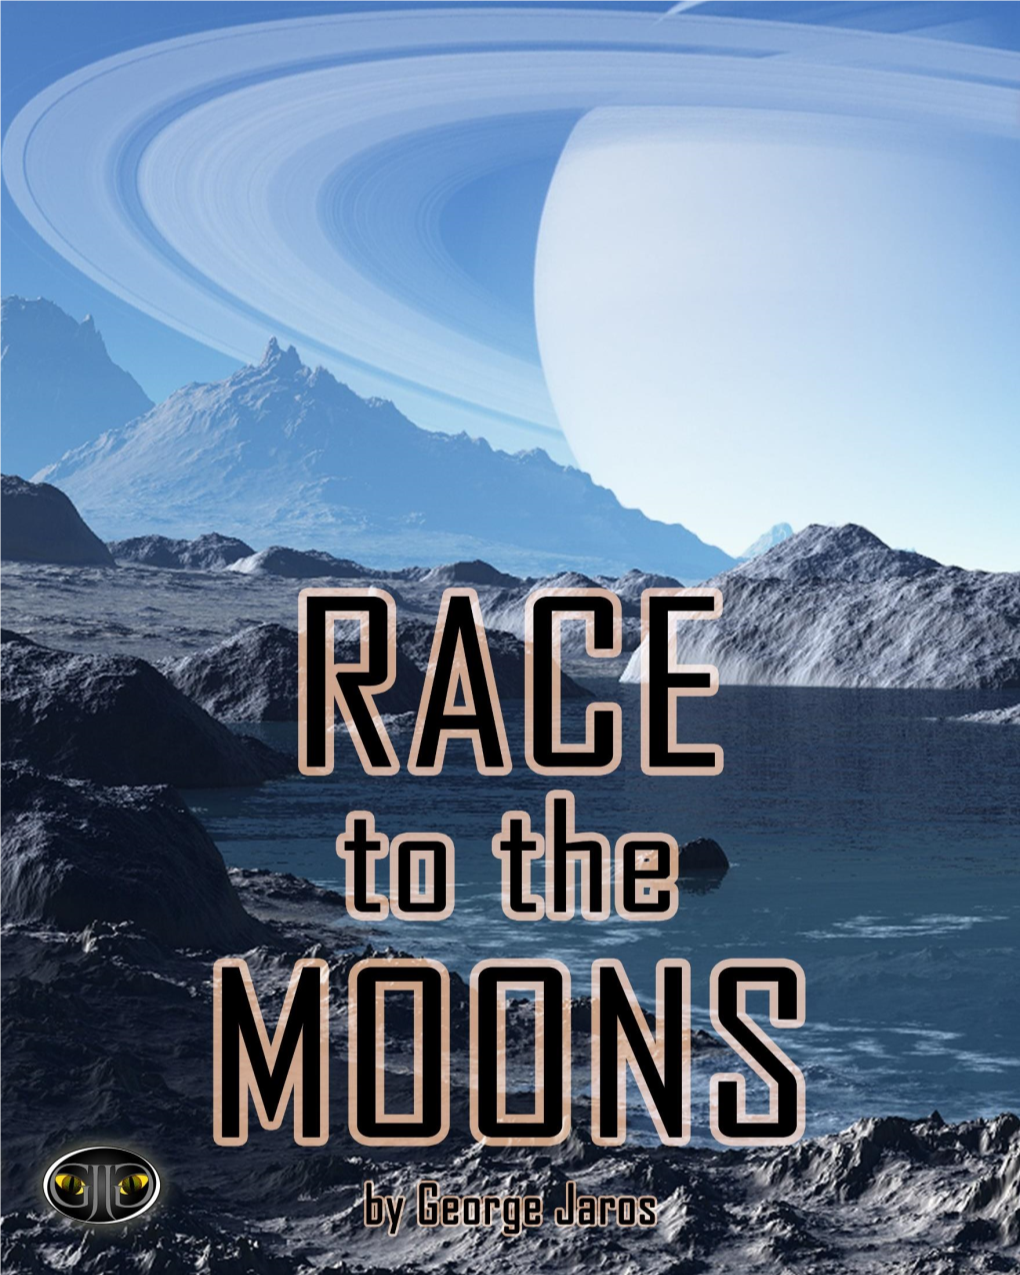 Race to the Moons